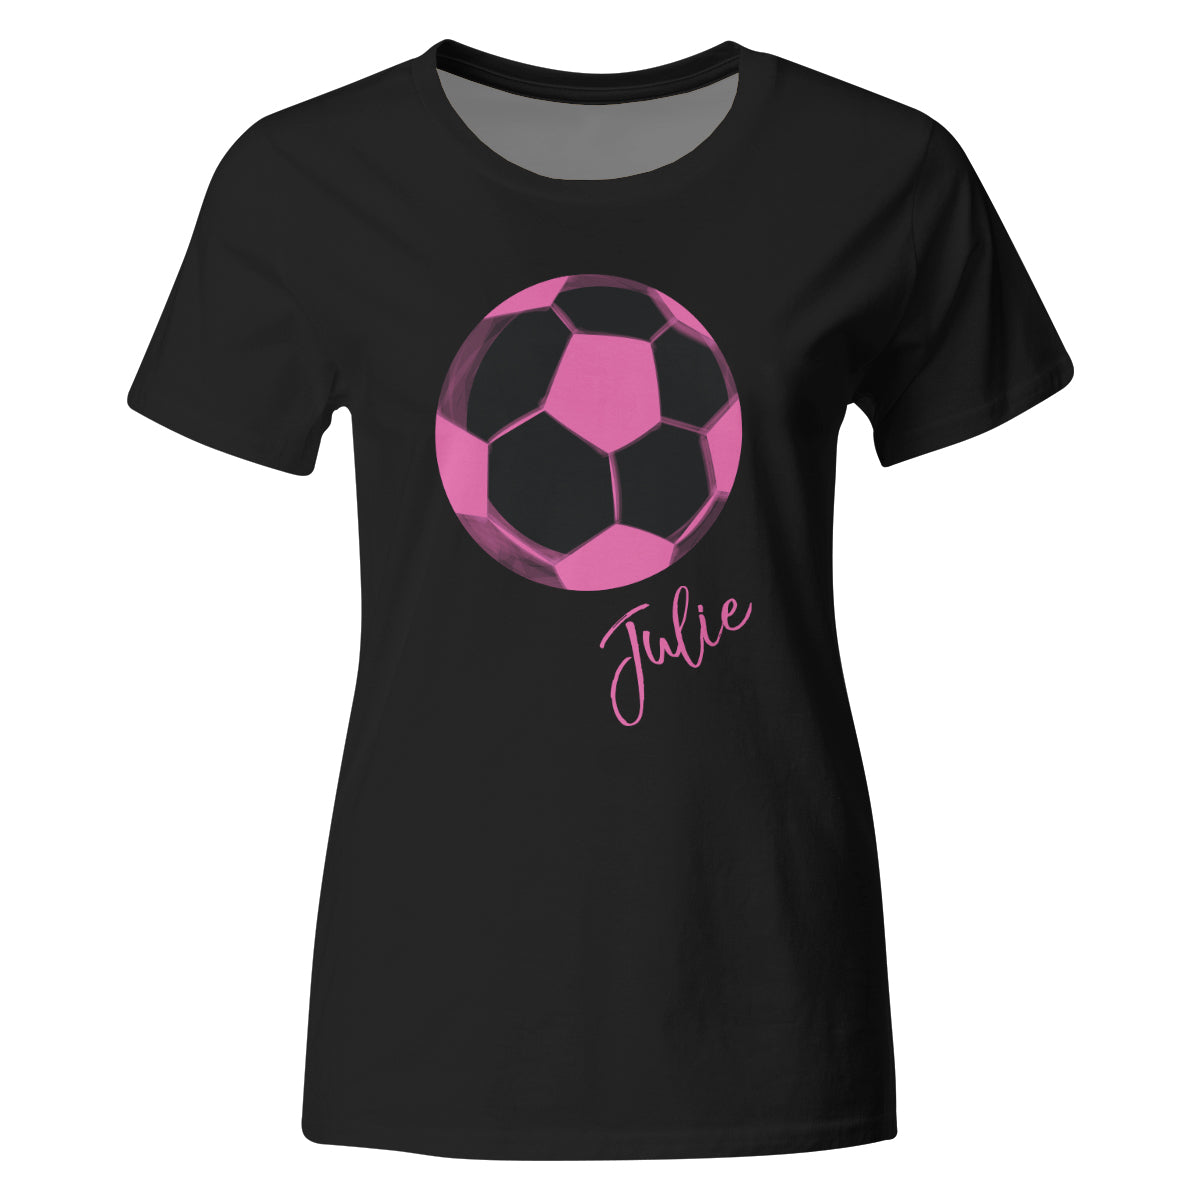 Soccer Ball Personalized Name and Number Black Short Sleeve Tee Shirt - Wimziy&Co.